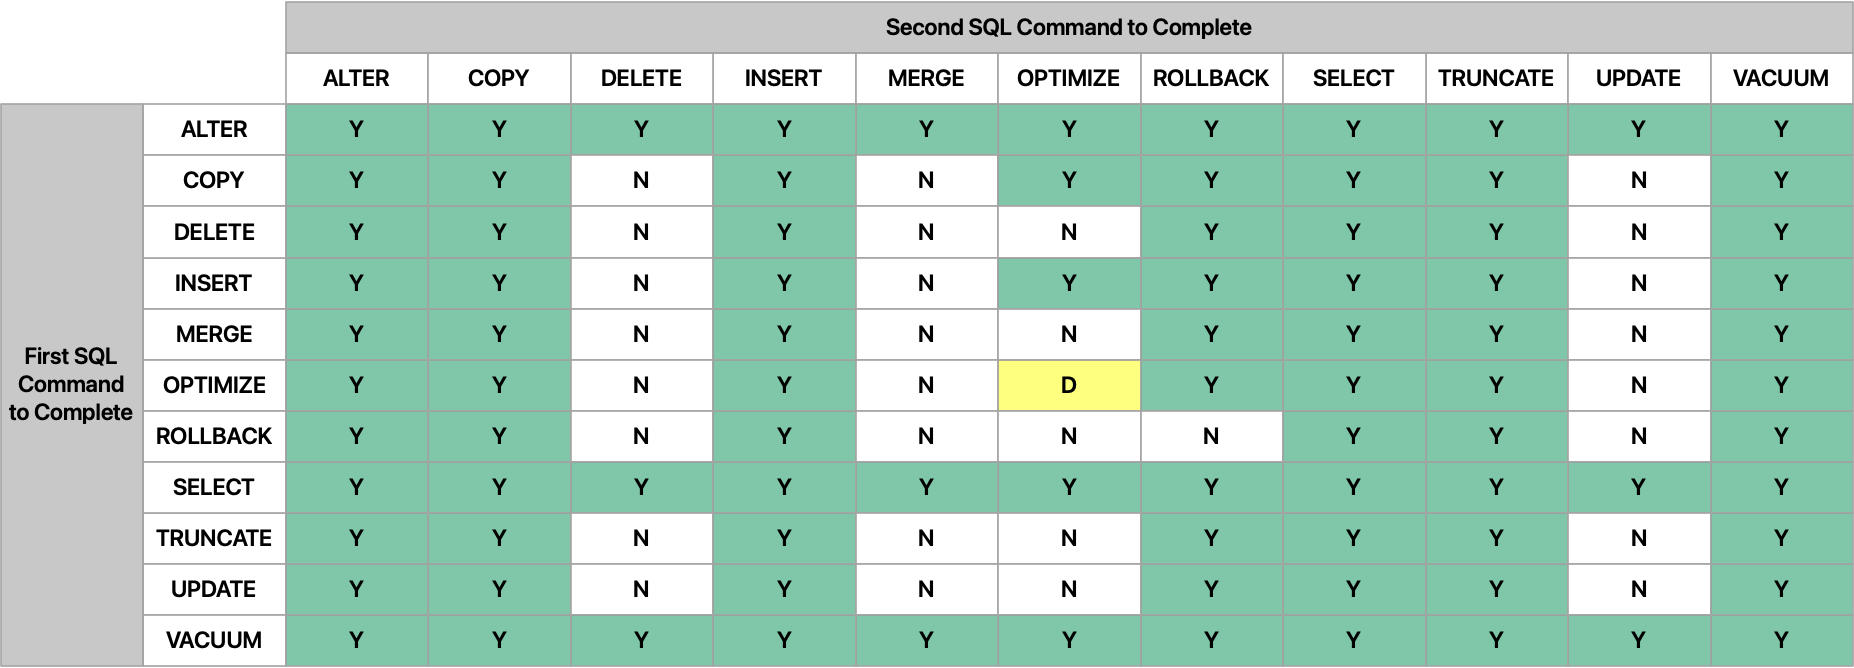 SQL commands that cause concurrency conflicts